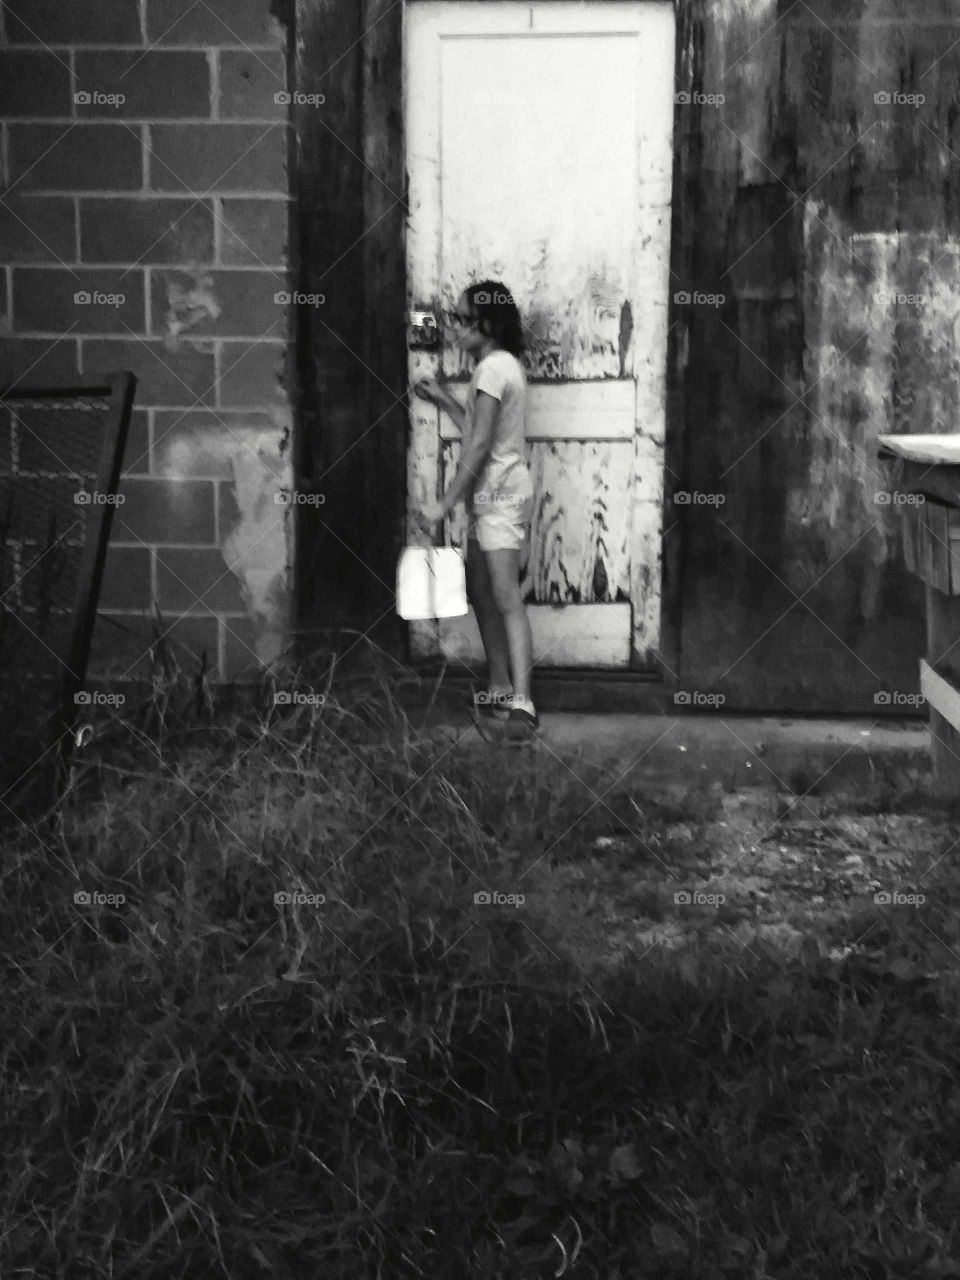 Little girl tries to get into an old shack in an alleyway to no avail.